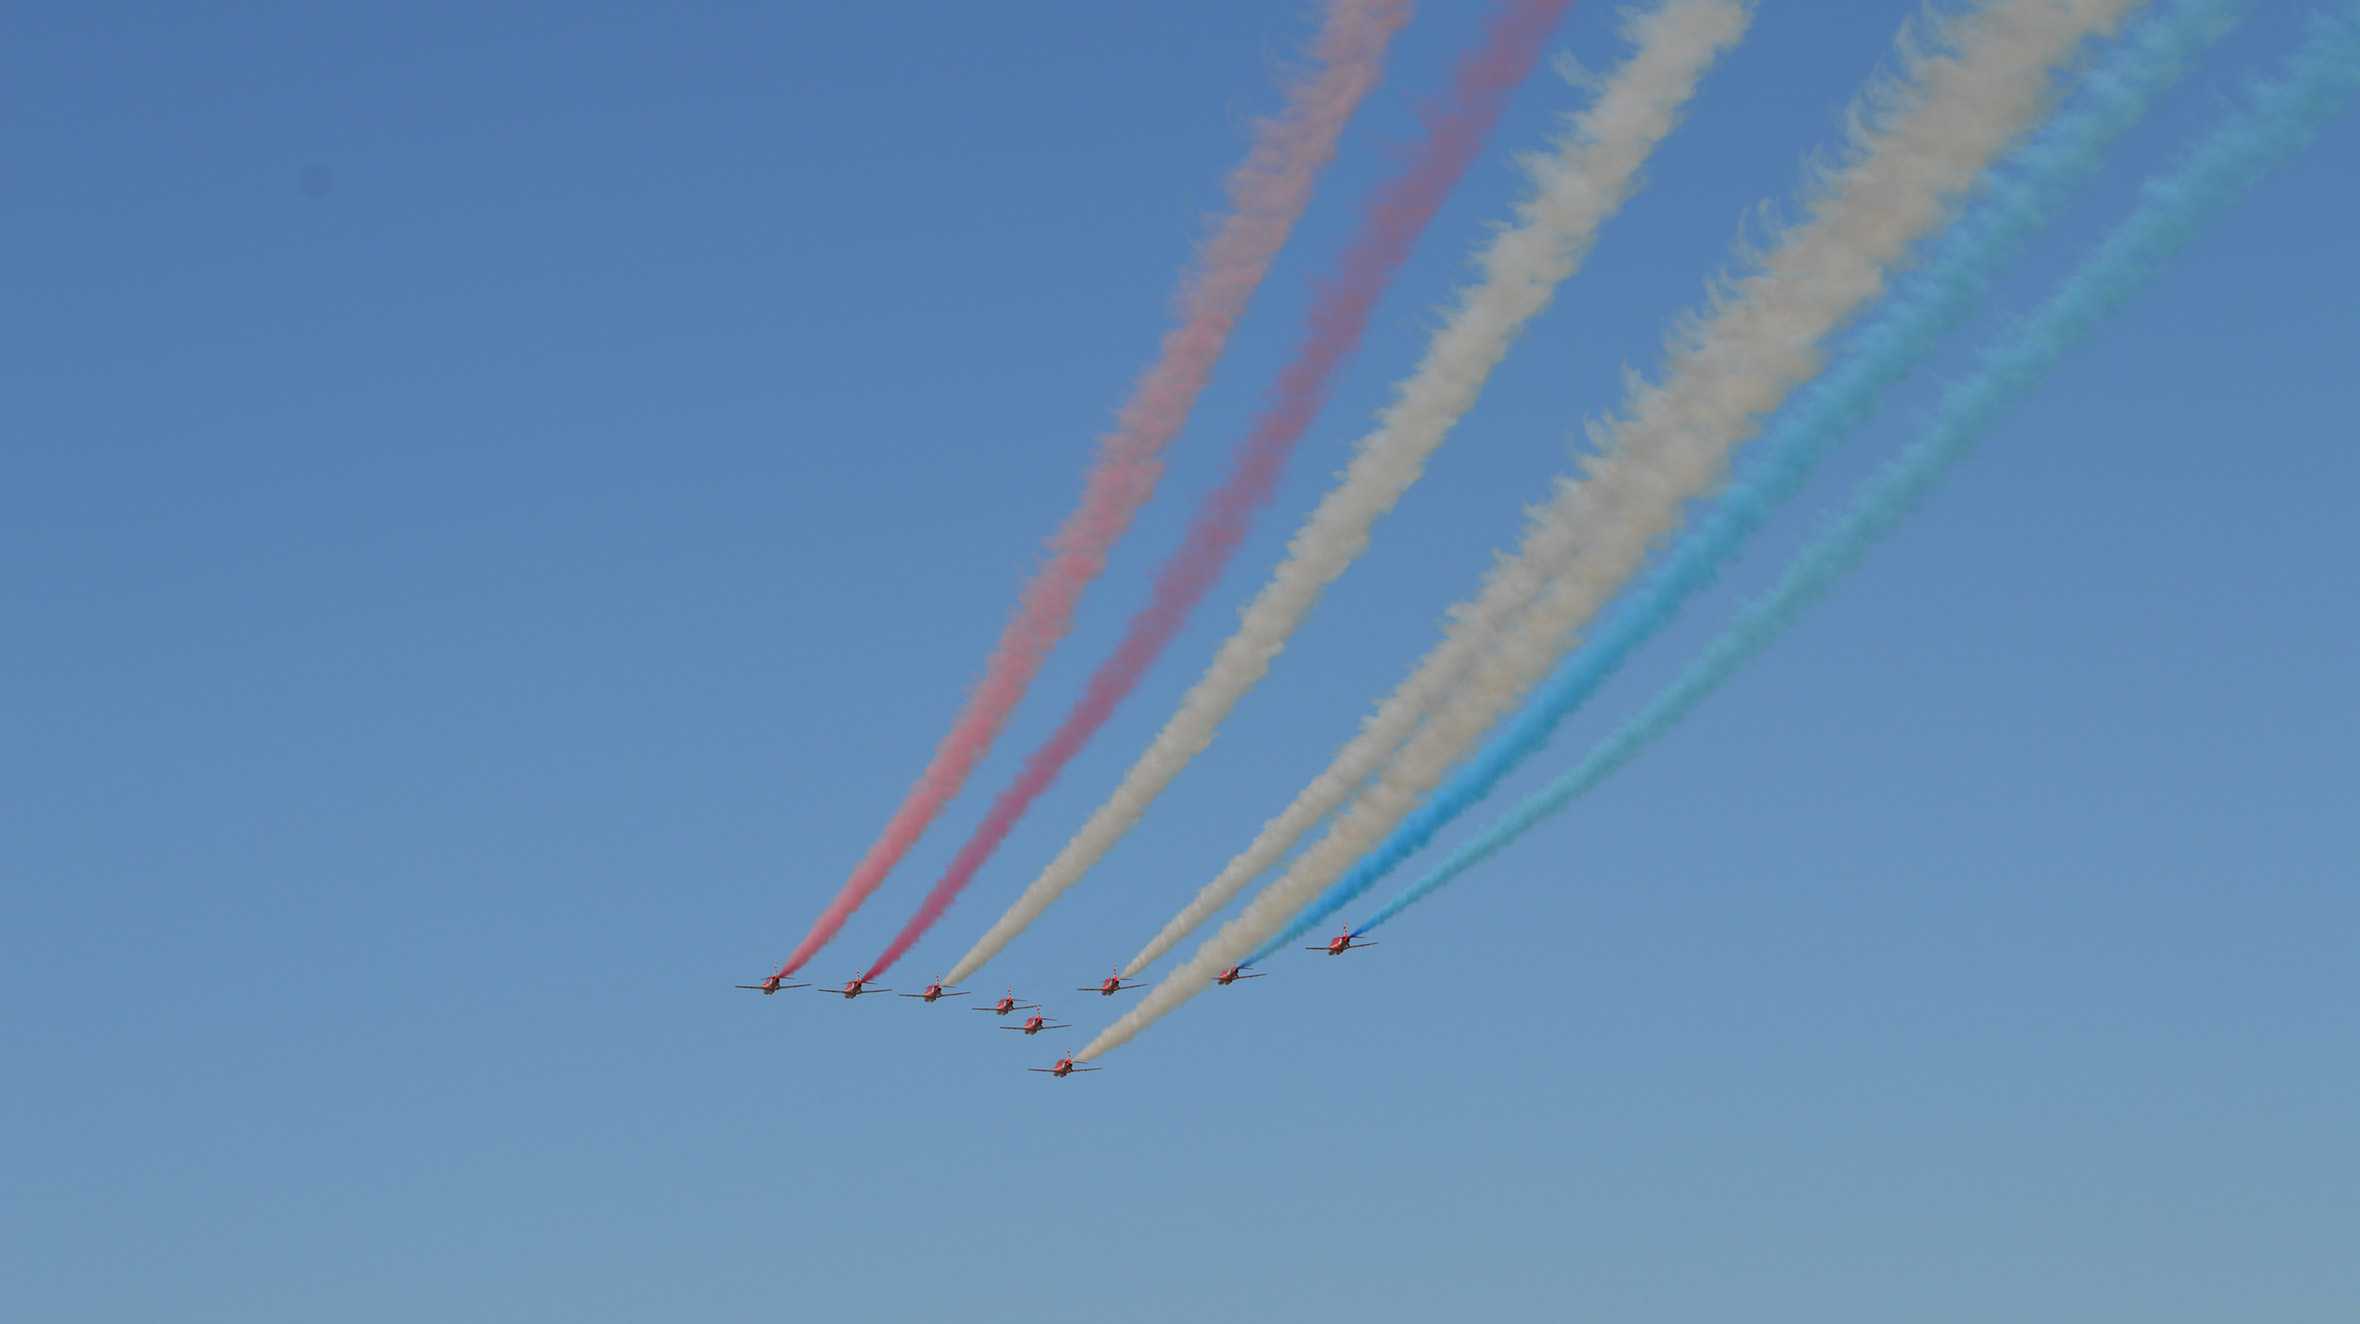 A formation of Red Arrows jets leaving a red, white and blue smoke trail across the sky.